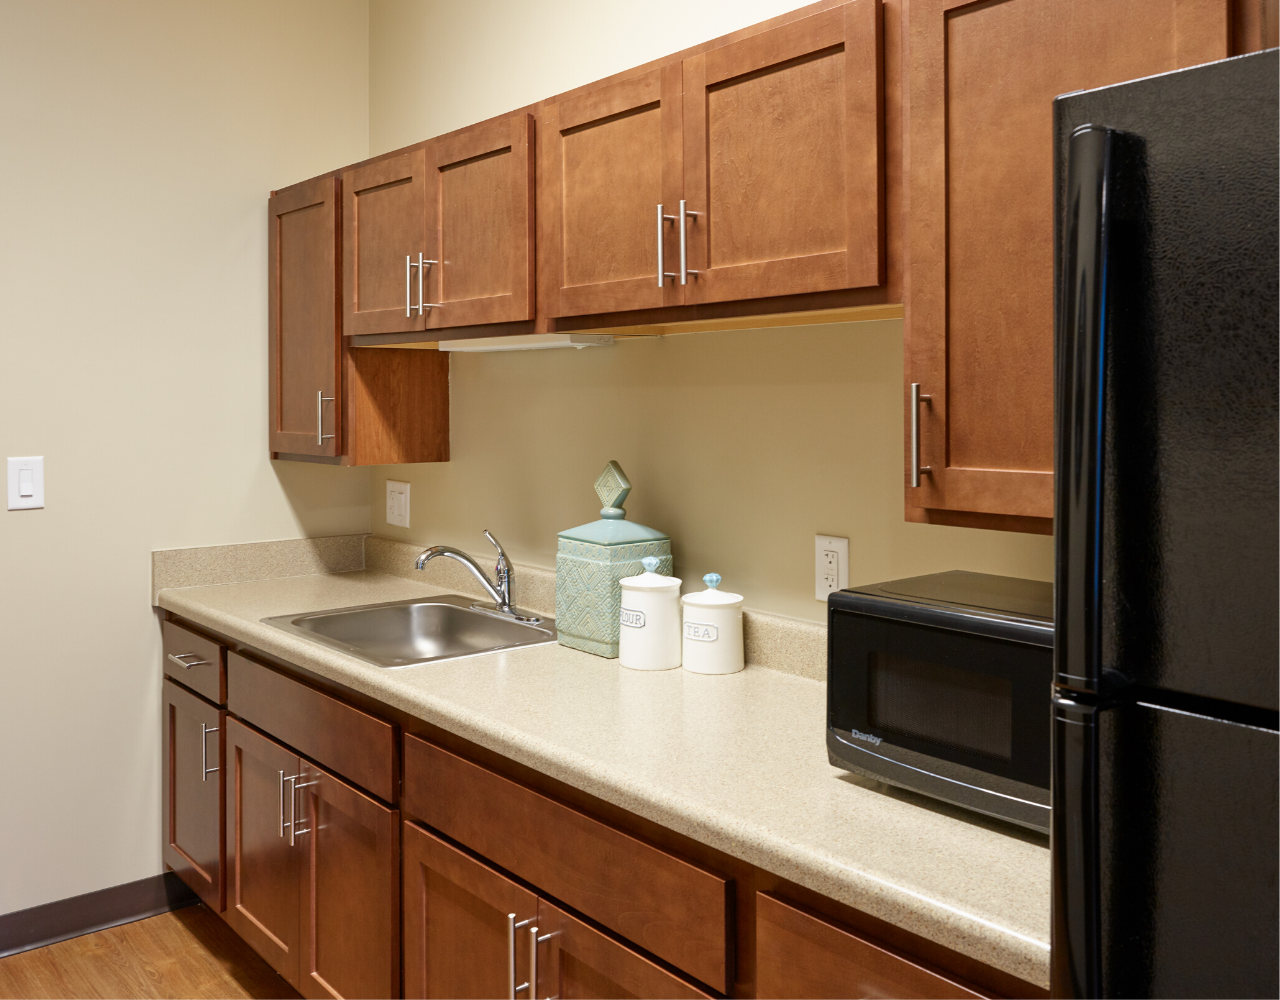 Assisted living studio apartment kitchen